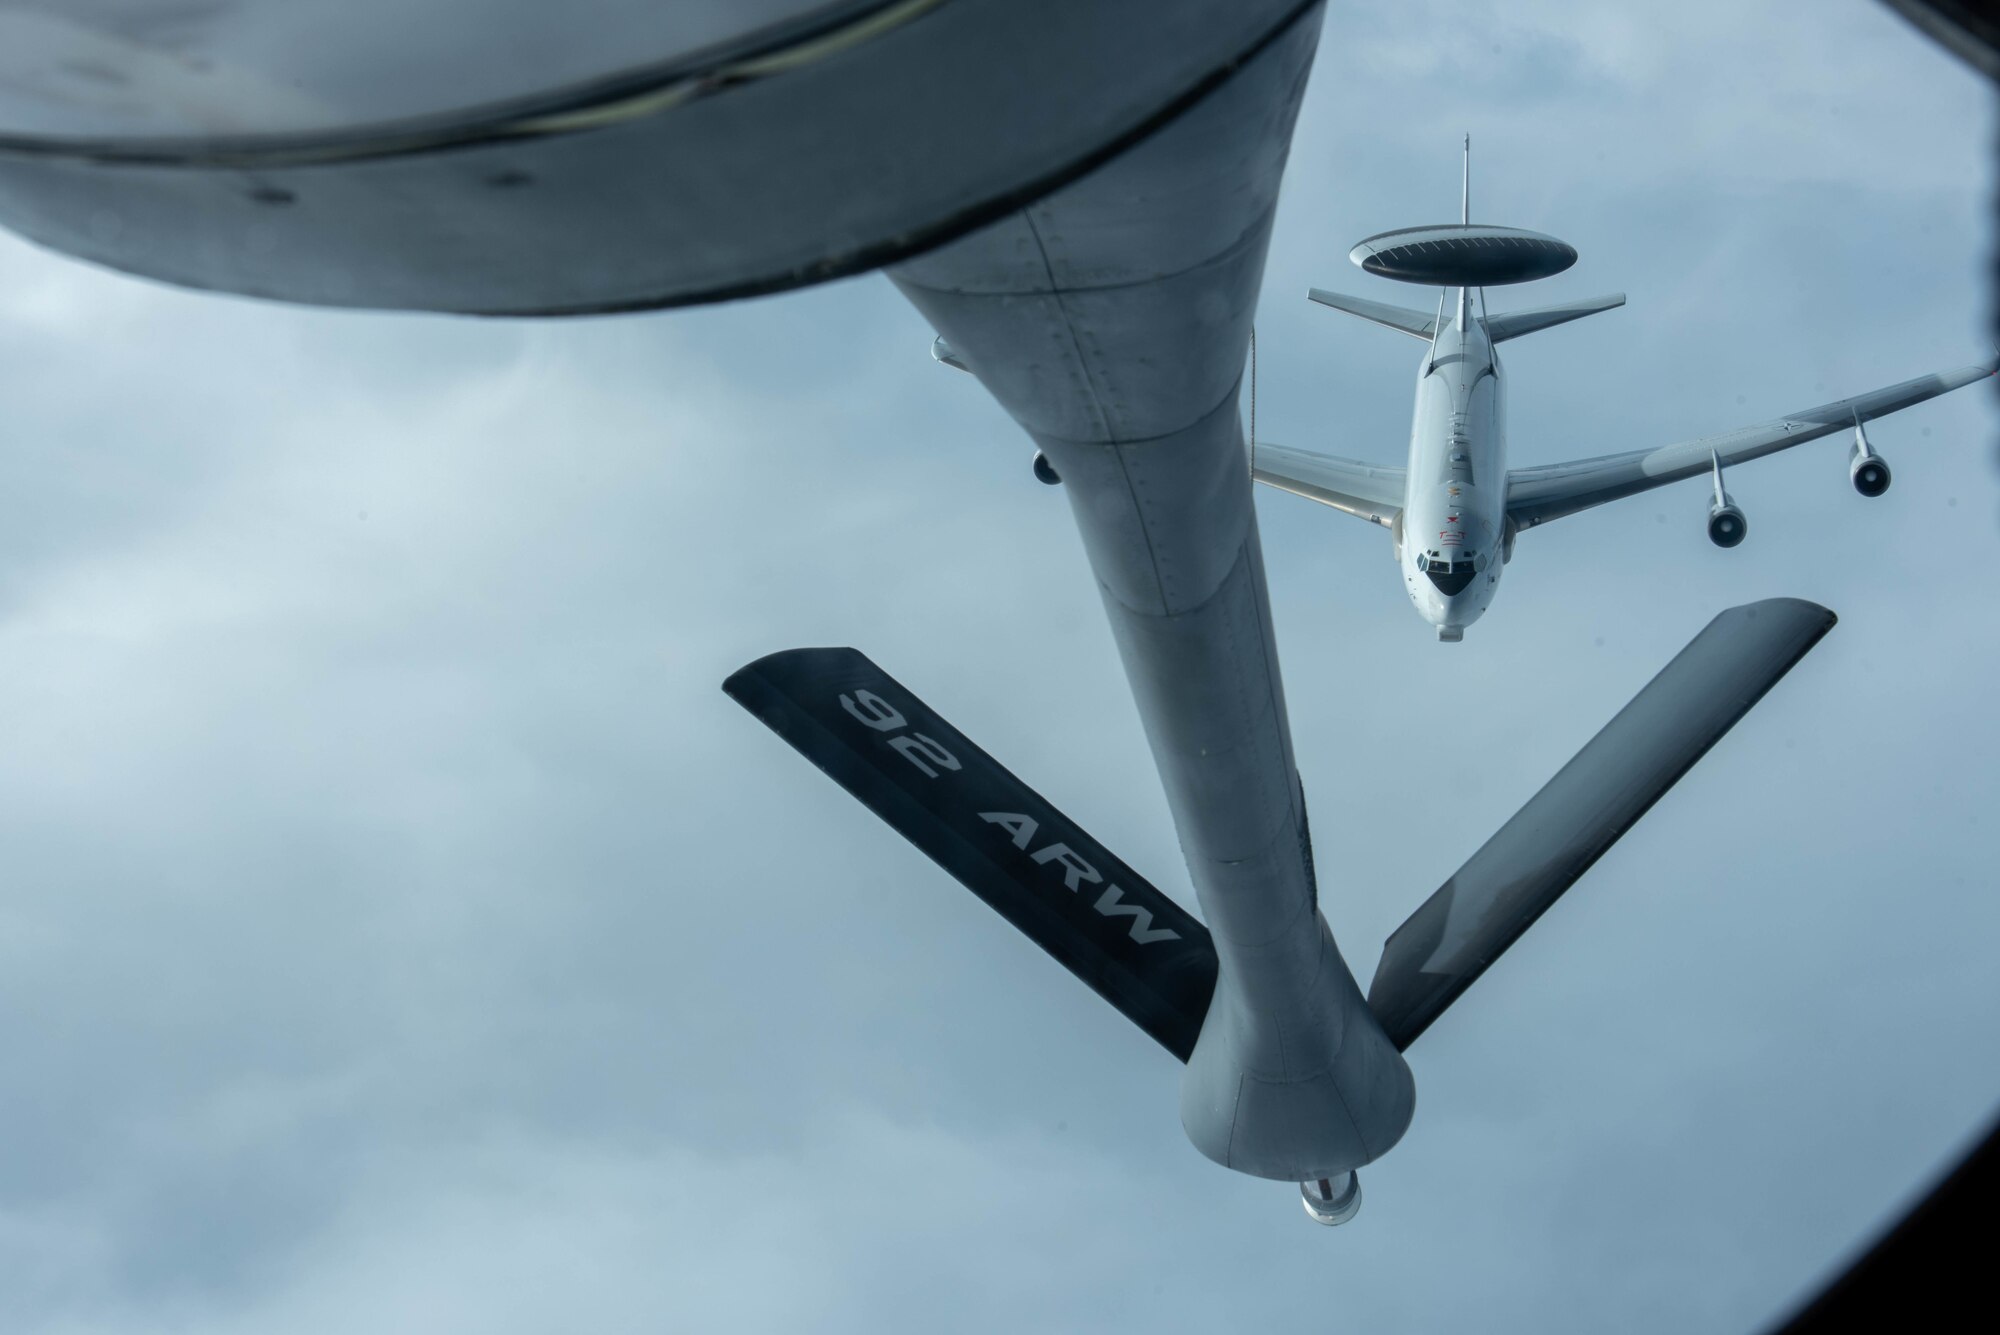 NATO aircraft moves into position to be refueled by a KC-135 aircraft.